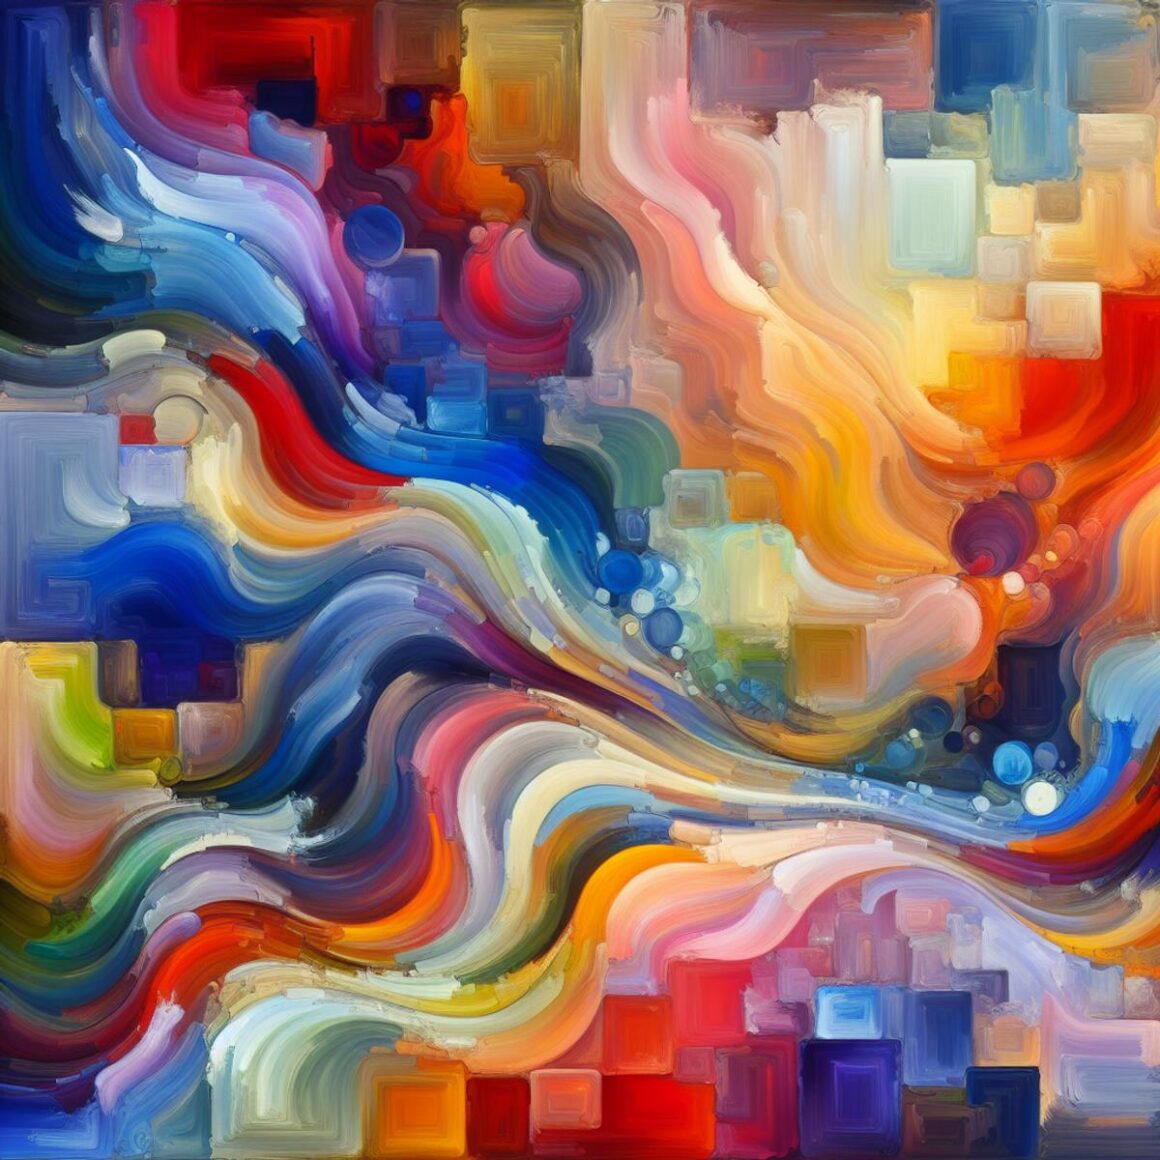 Vibrant abstract painting with flowing colors and dynamic shapes.